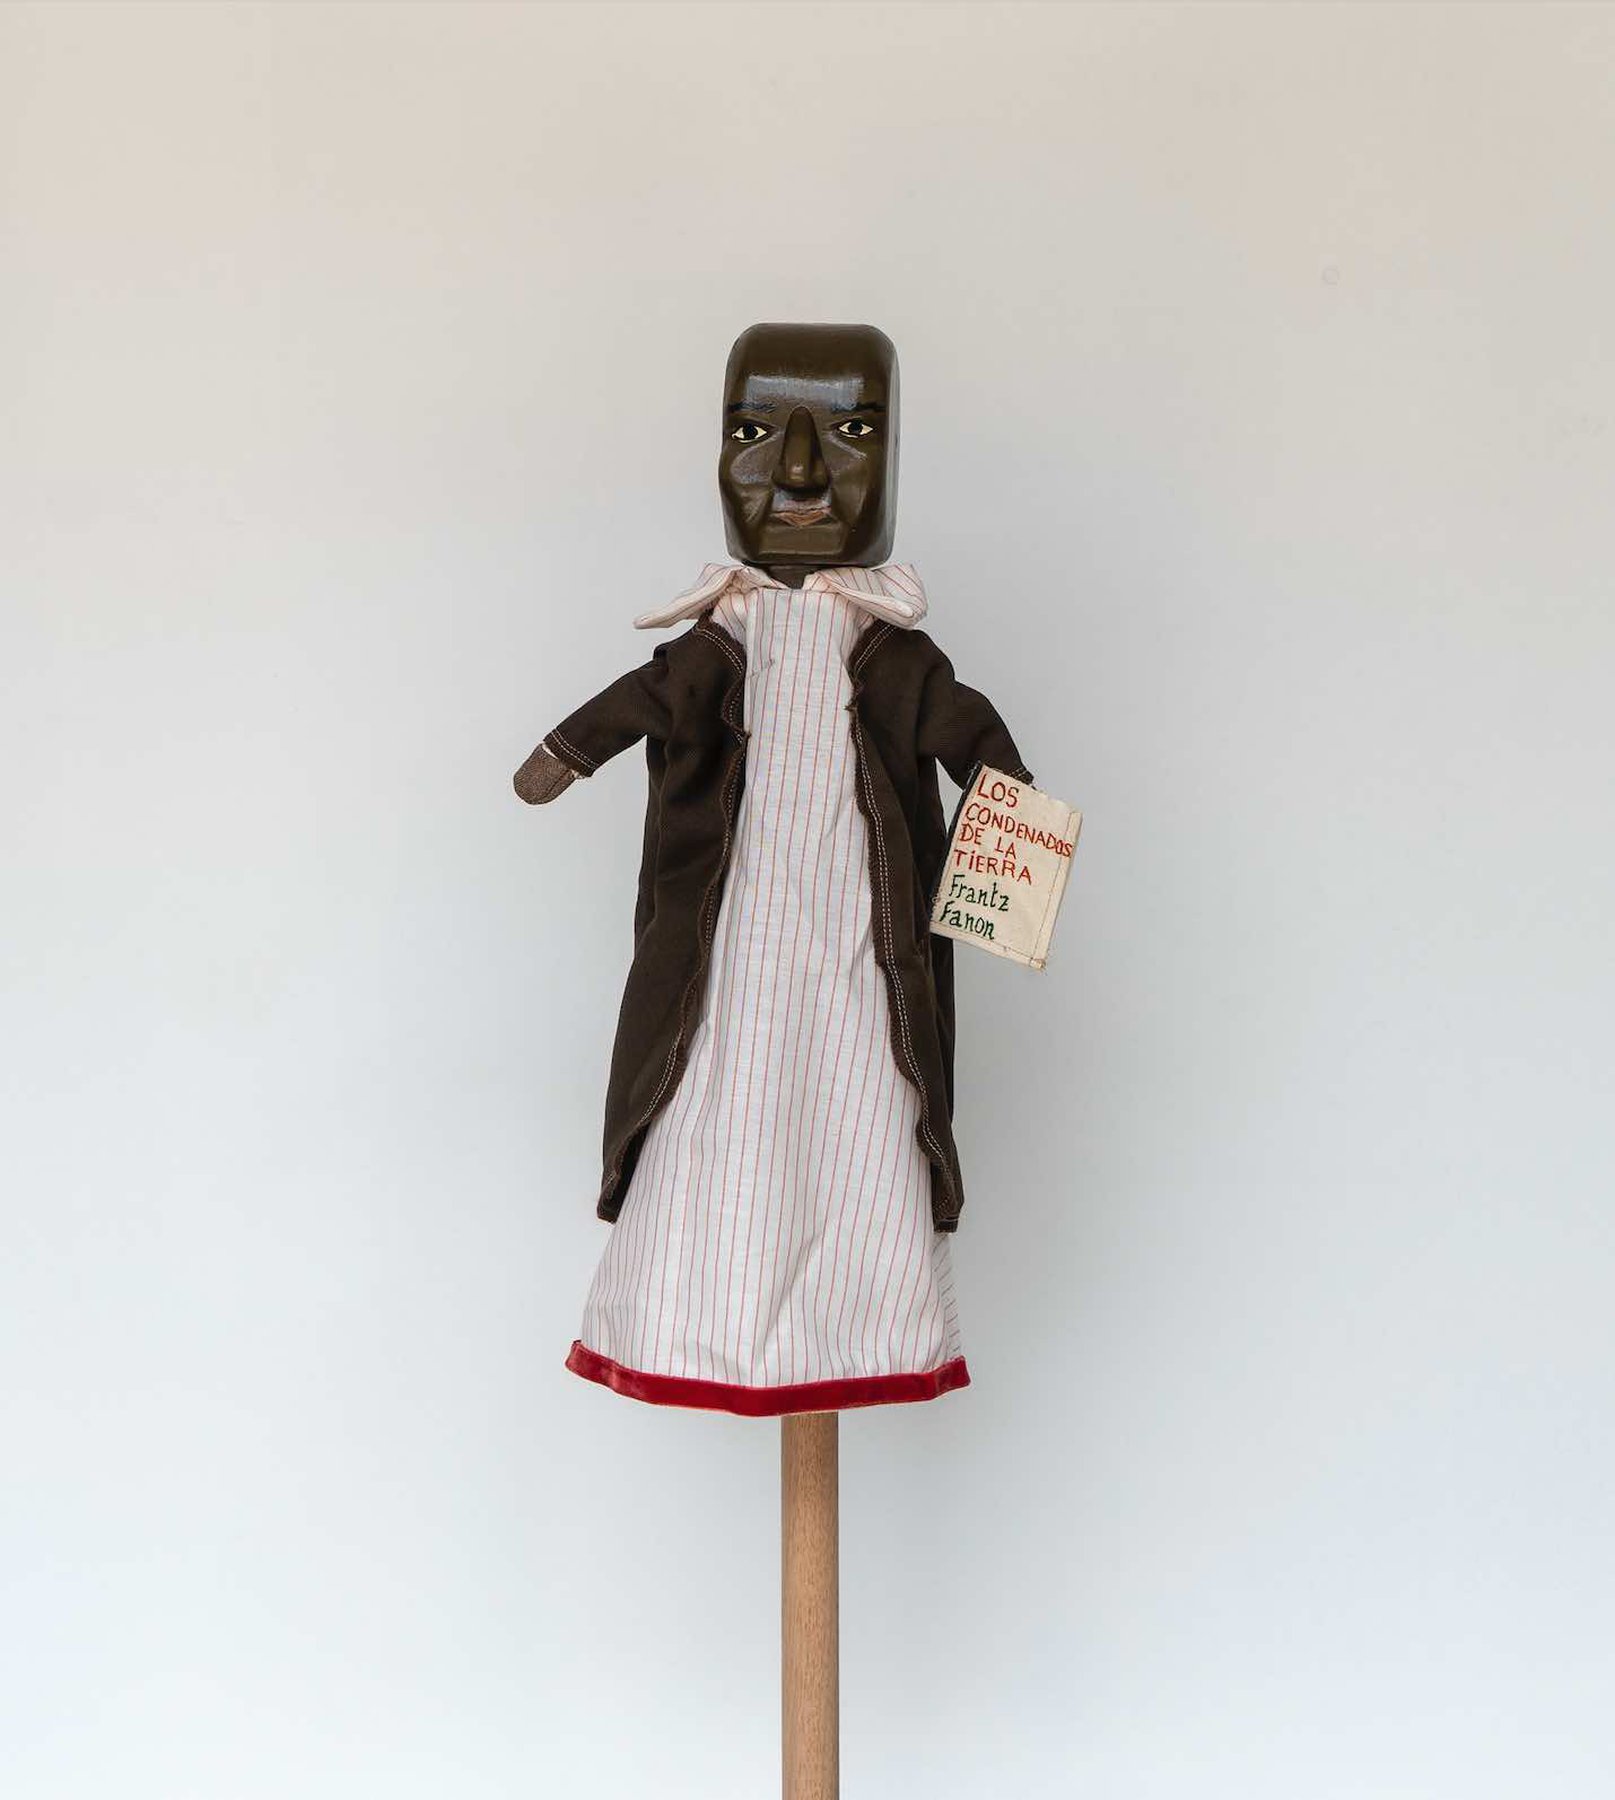 Daniela Ortiz, The Brightness of Greedy Europe, 2022, wood hand-carved, sewn, knitted and embroidered costumes (25 cm) puppet - Frantz Fanon